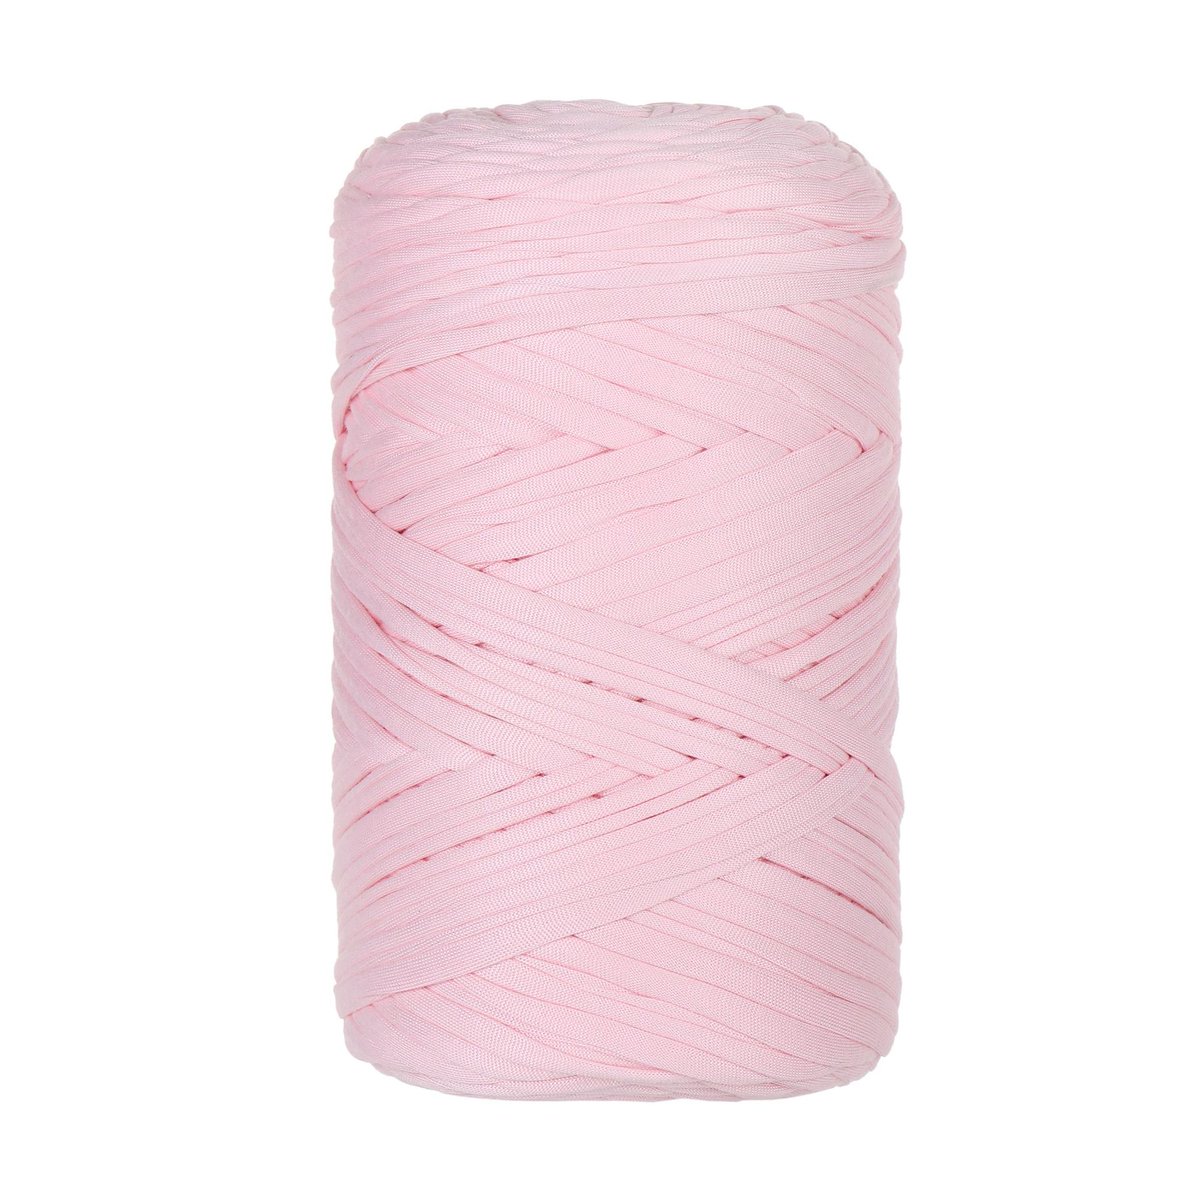 📷Check out T-Shirt Yarn! Made from 100% polyester, this thick hand knitting yarn is perfect for making bags, baskets, and rugs that will stand the test of time. 
#TShirtYarn #HandKnitting #CrochetProjects #WholesaleBuying #DurableMaterials #VersatileDesigns #PolyesterYarn #Bags